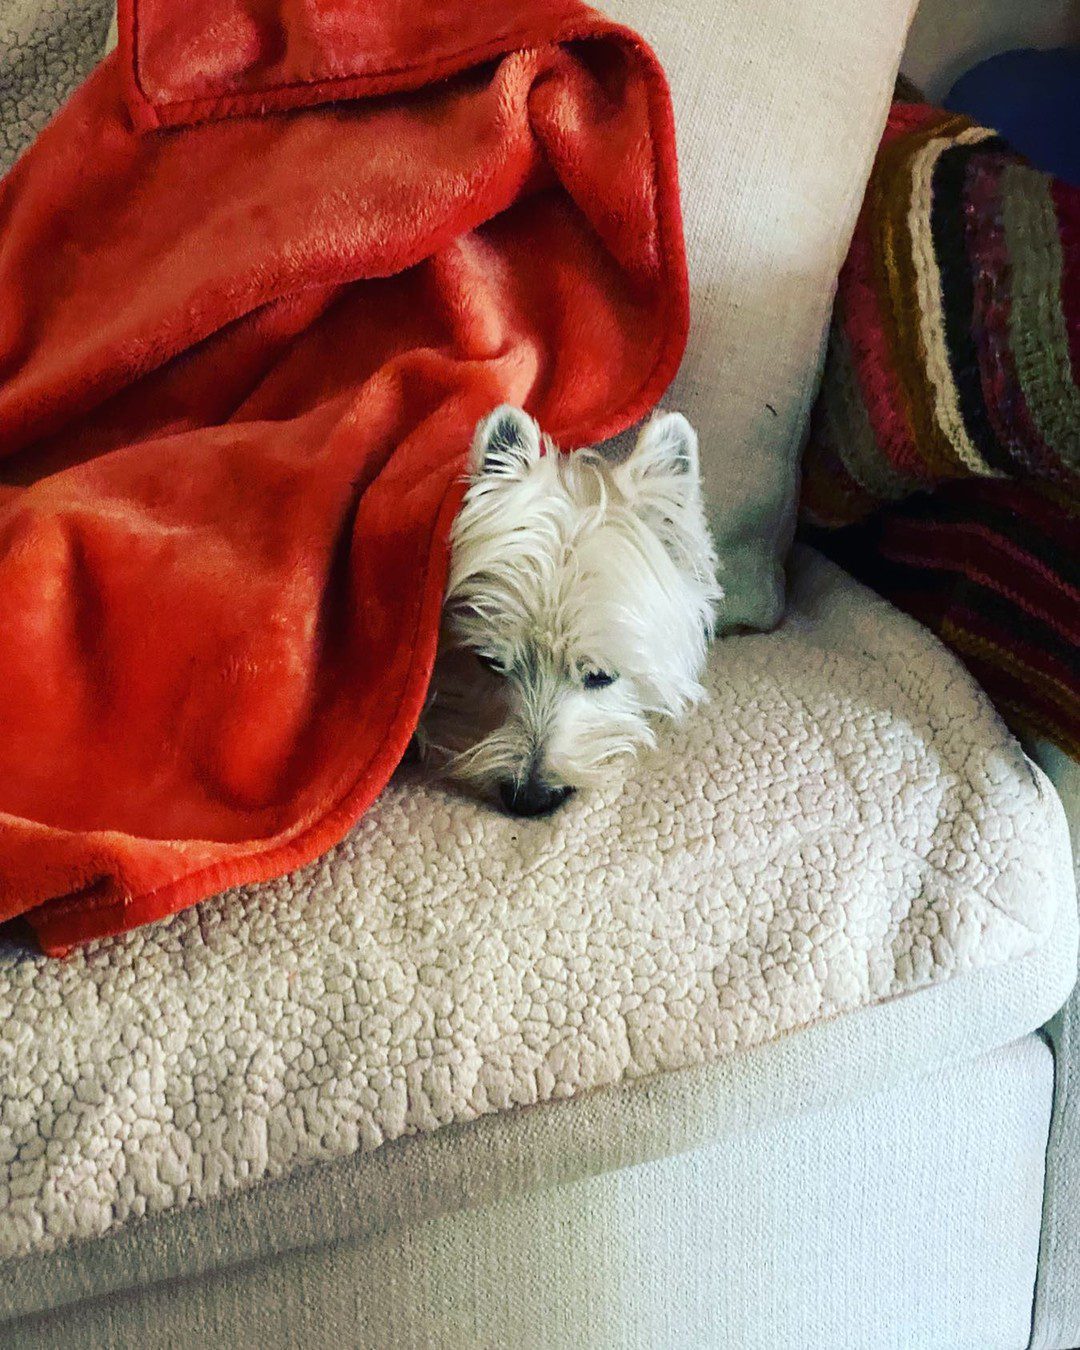 Too cold to go outside. Loves the snuggles
💕🐾💕🐾💕🐾💕
.
.
.
.
. #westie #westiegram #westiemania #westielove #westielife #westhighlandwhiteterrier #dogofinstagram #puppy  #westiegram #westielove #westiedog #westiedog #westielovers #instawestie #giangitownsend #lovemylife #westiesarethebest